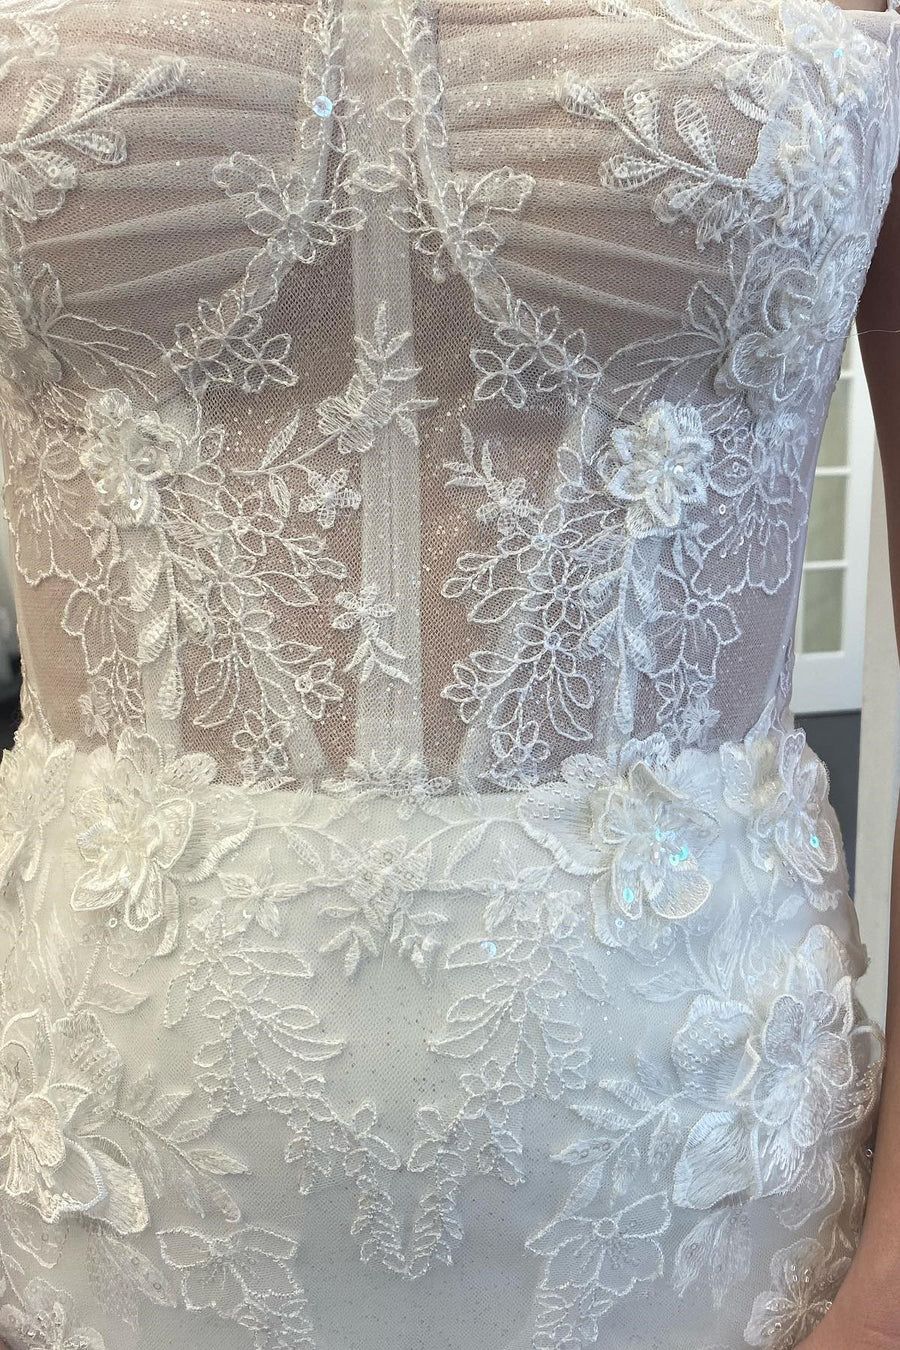 Stylish Lace Mermaid See Though Wedding Dress - DollyGown